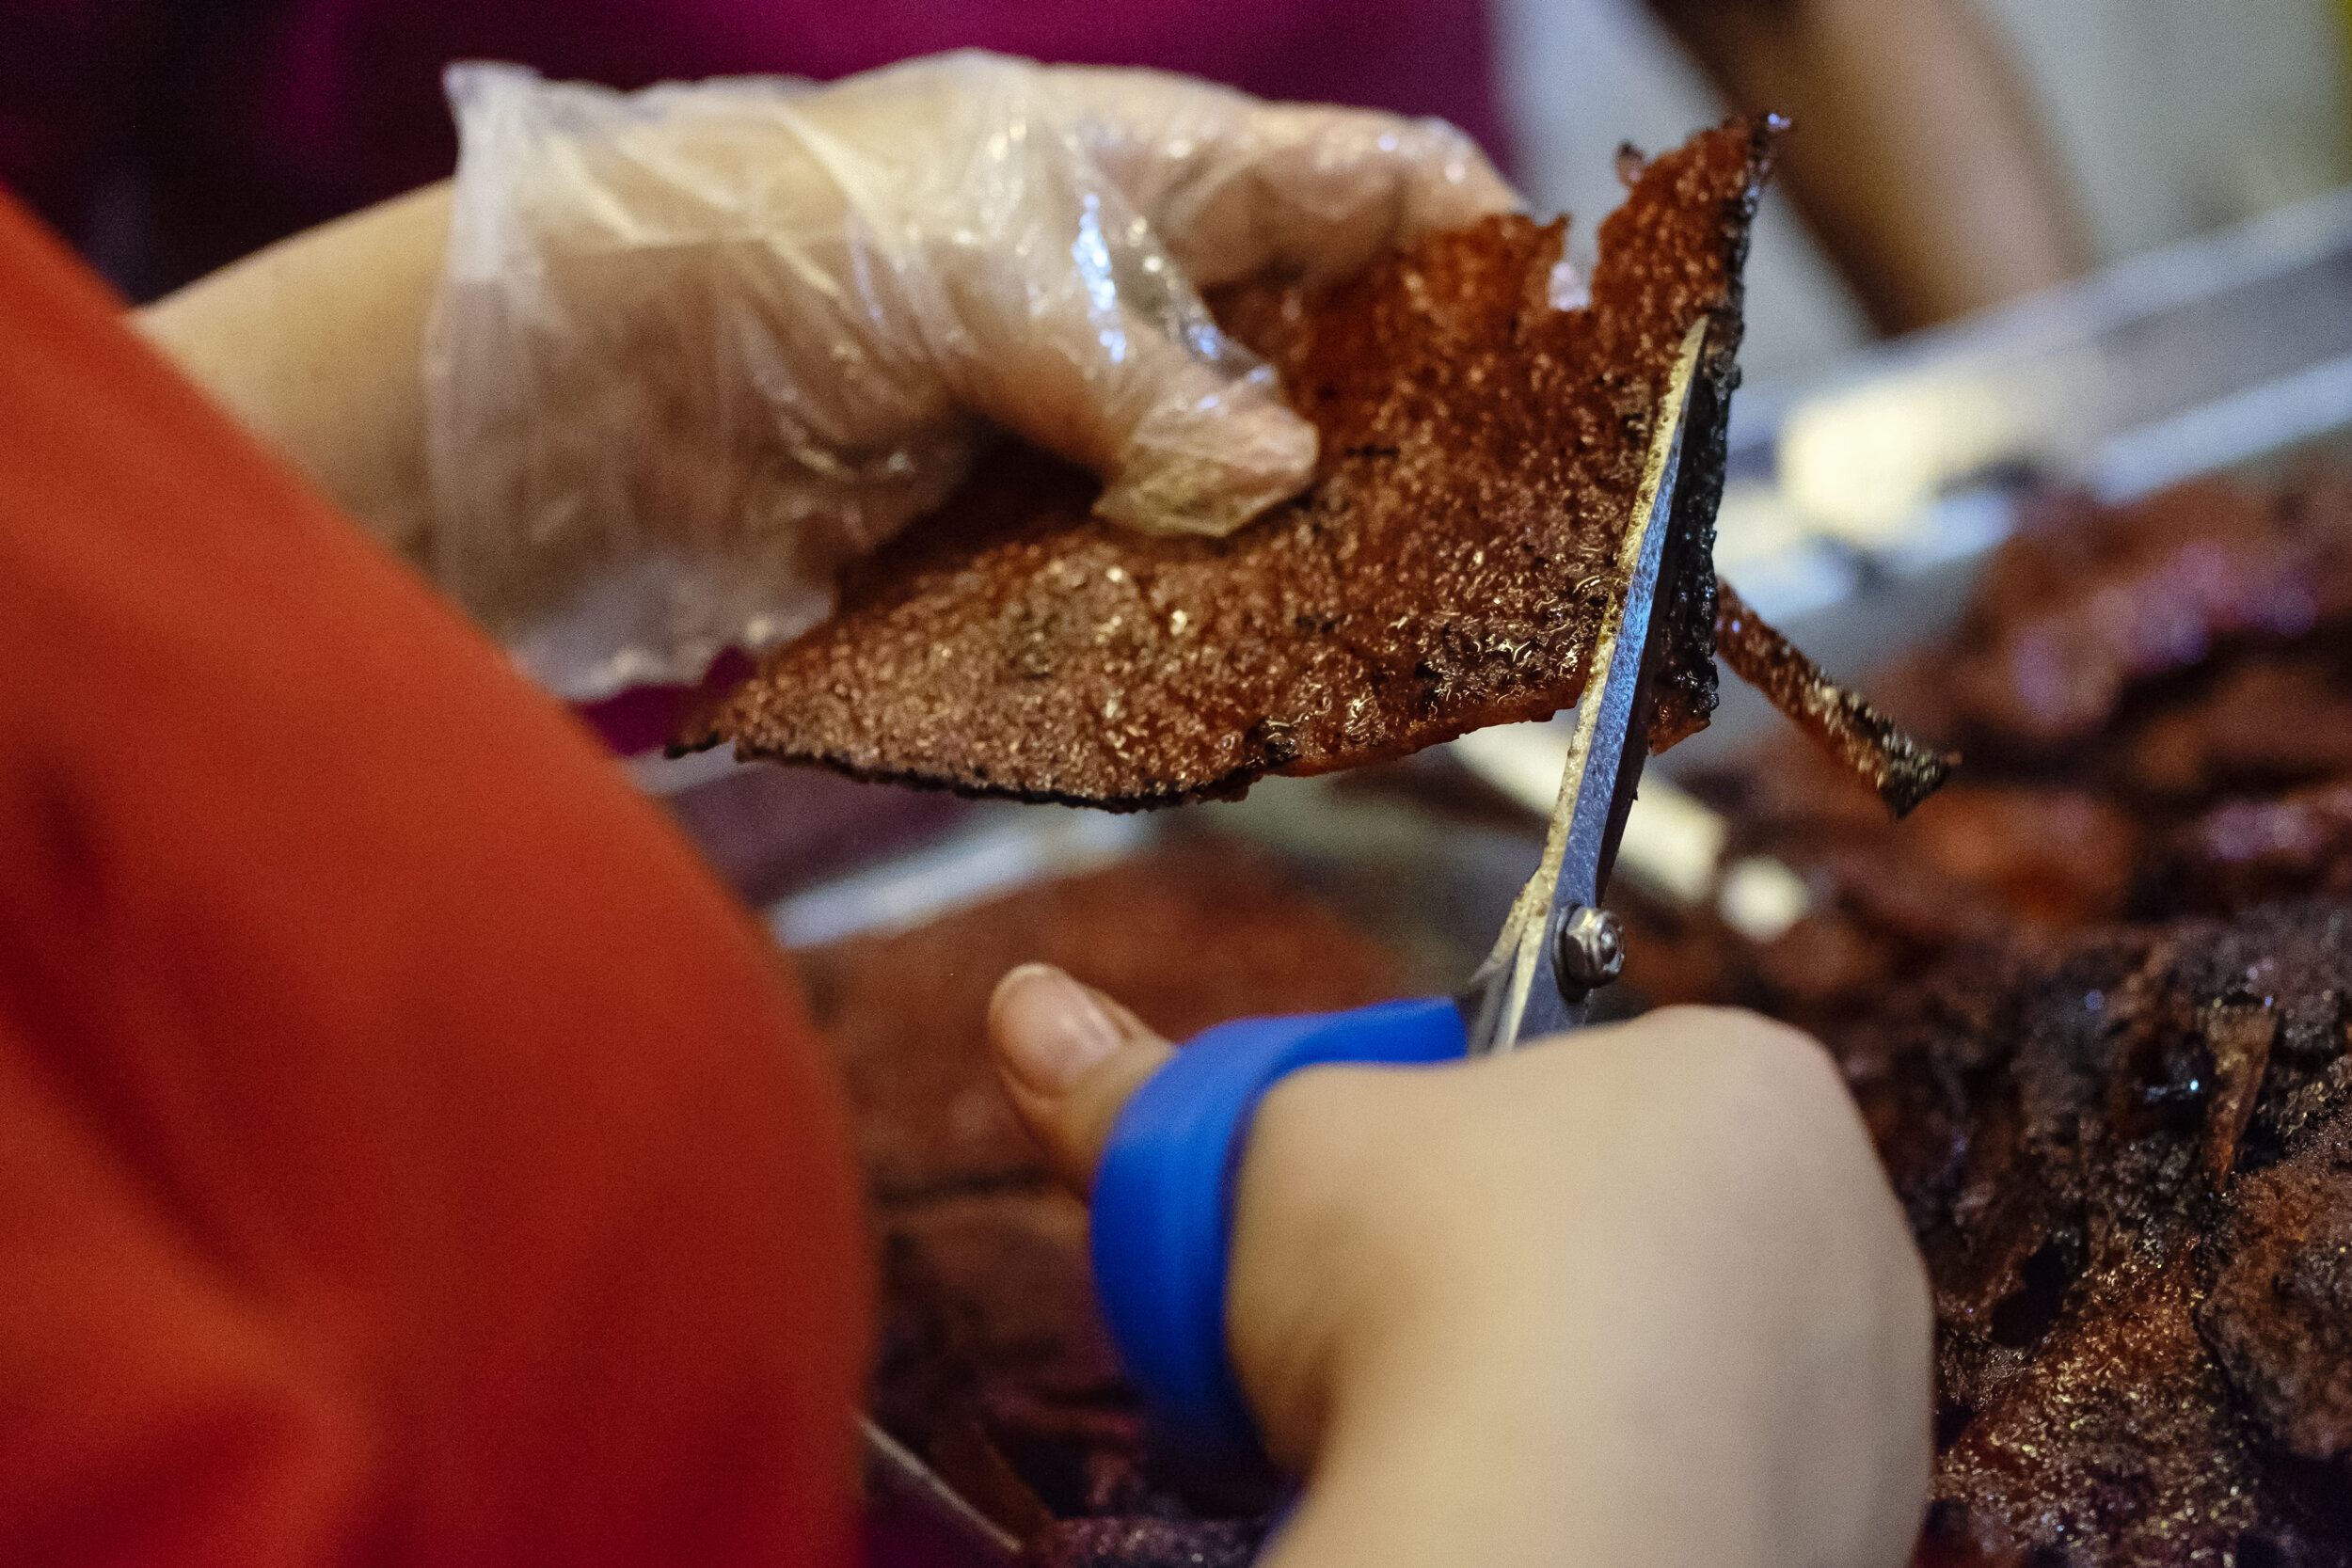  An employee carefully trims off a charred edge on a slice of Bak Kwa before it gets packed for sale 